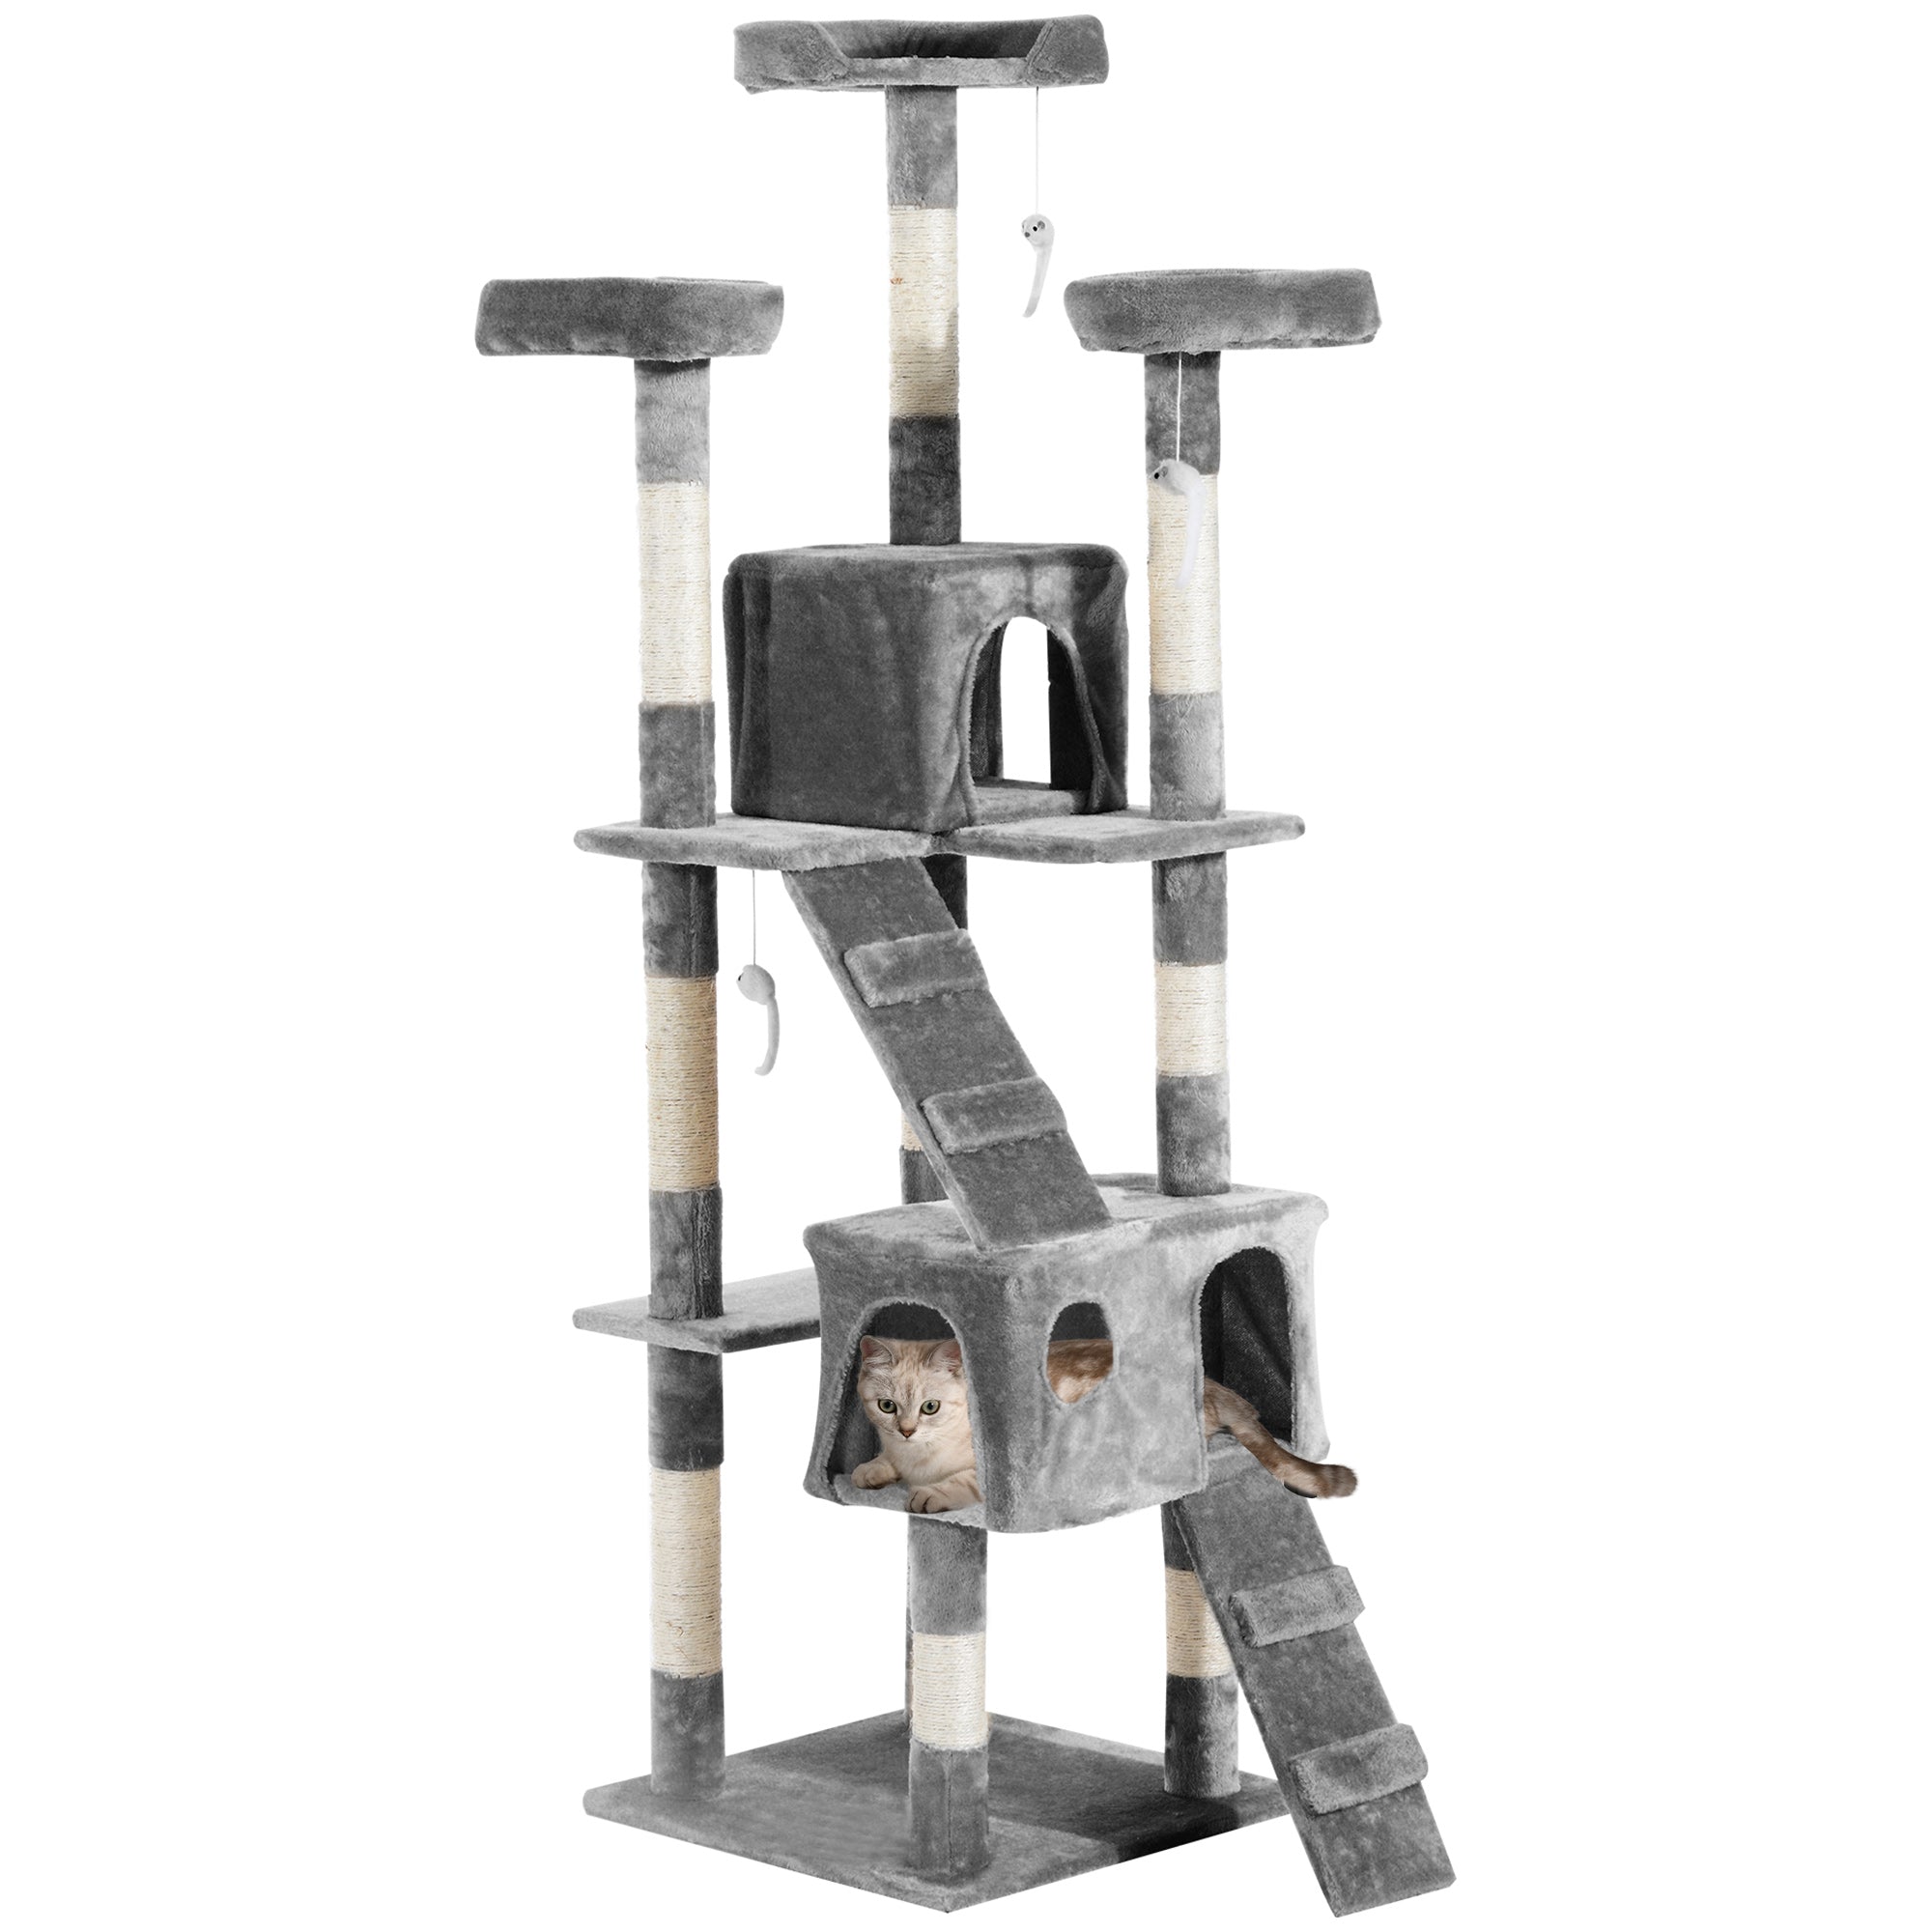 PawHut Cat Tree Scratcher Activity Centre - Condo Scratching Post Toy Bed  | TJ Hughes